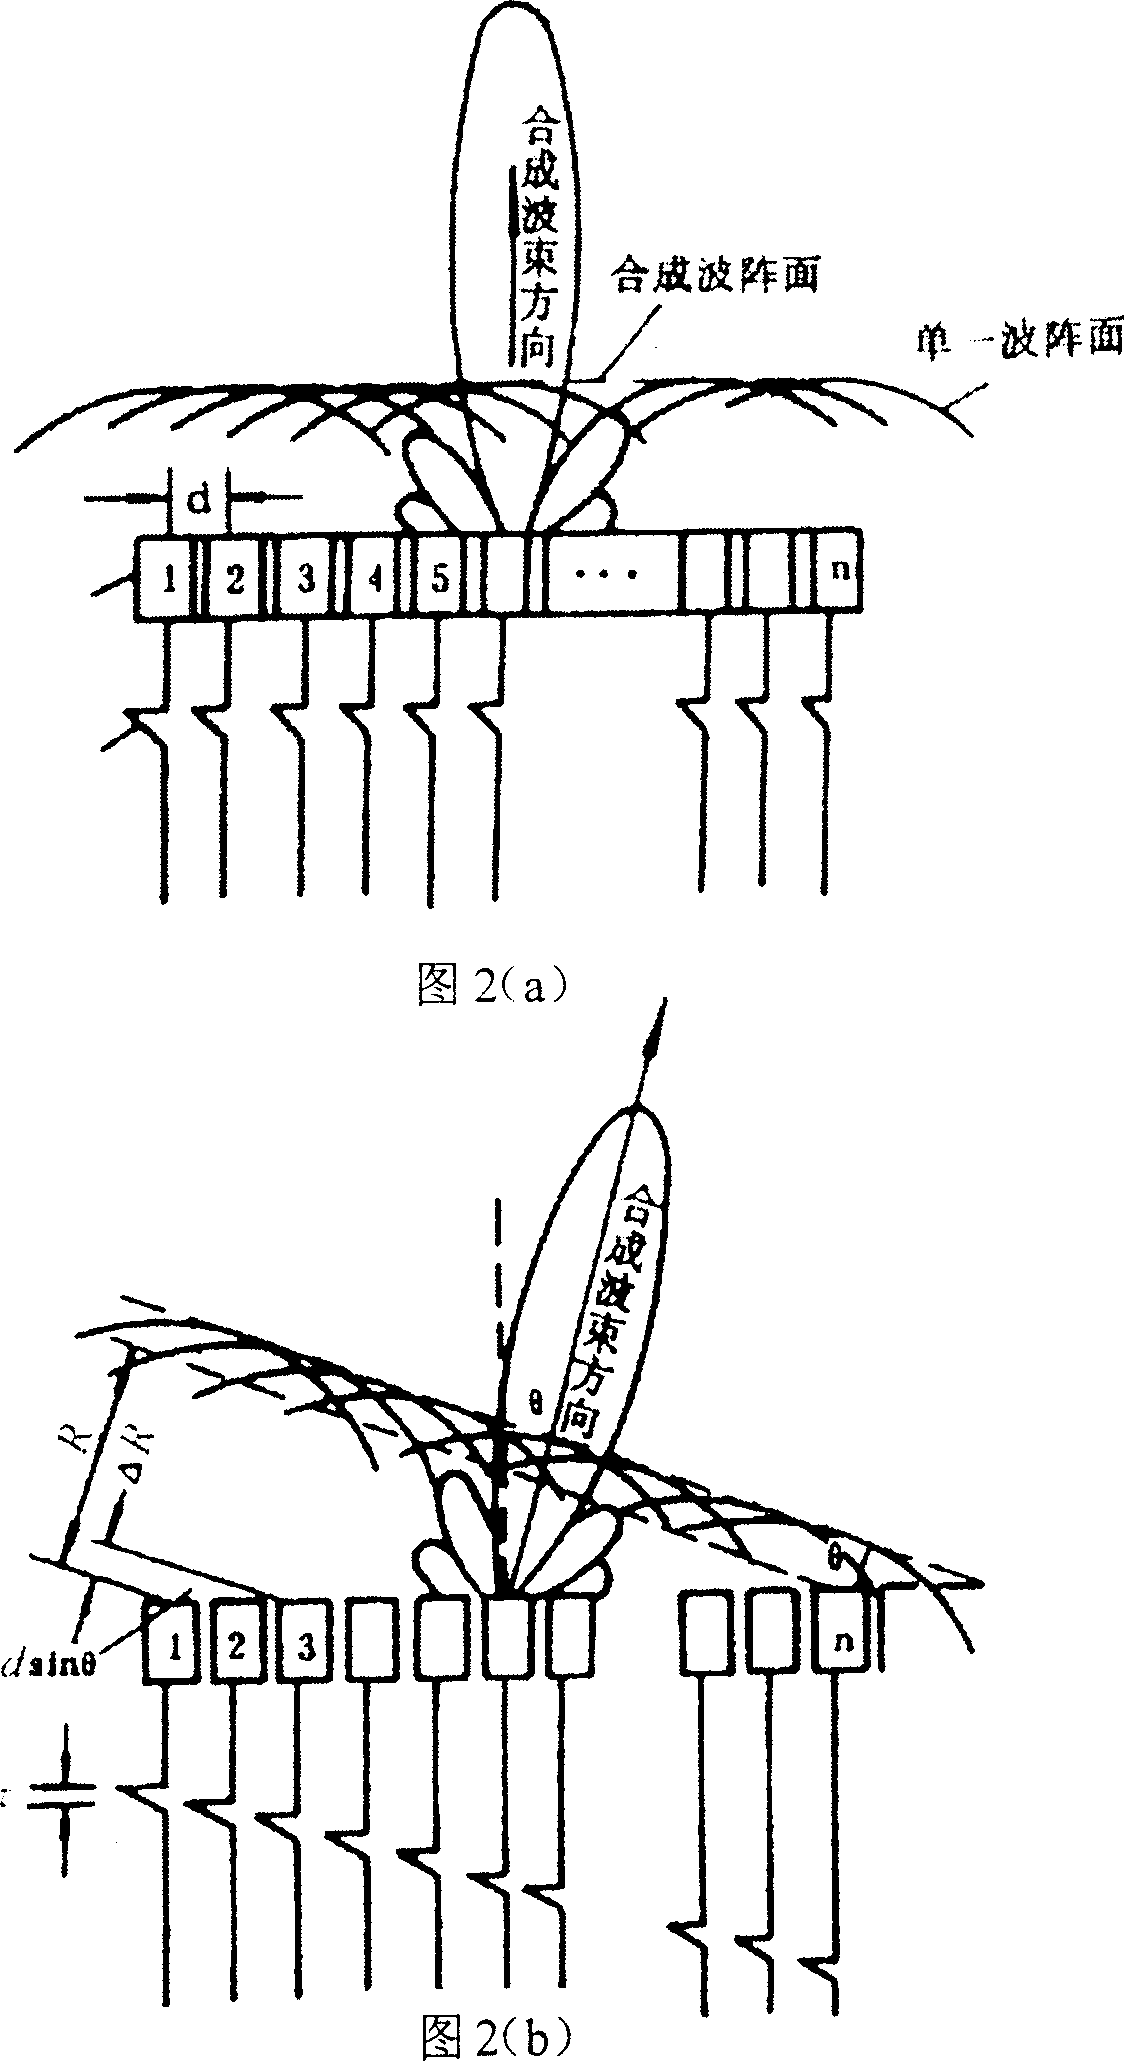 Down-hole forward looking phase controlled sound wave imaging method and imaging device